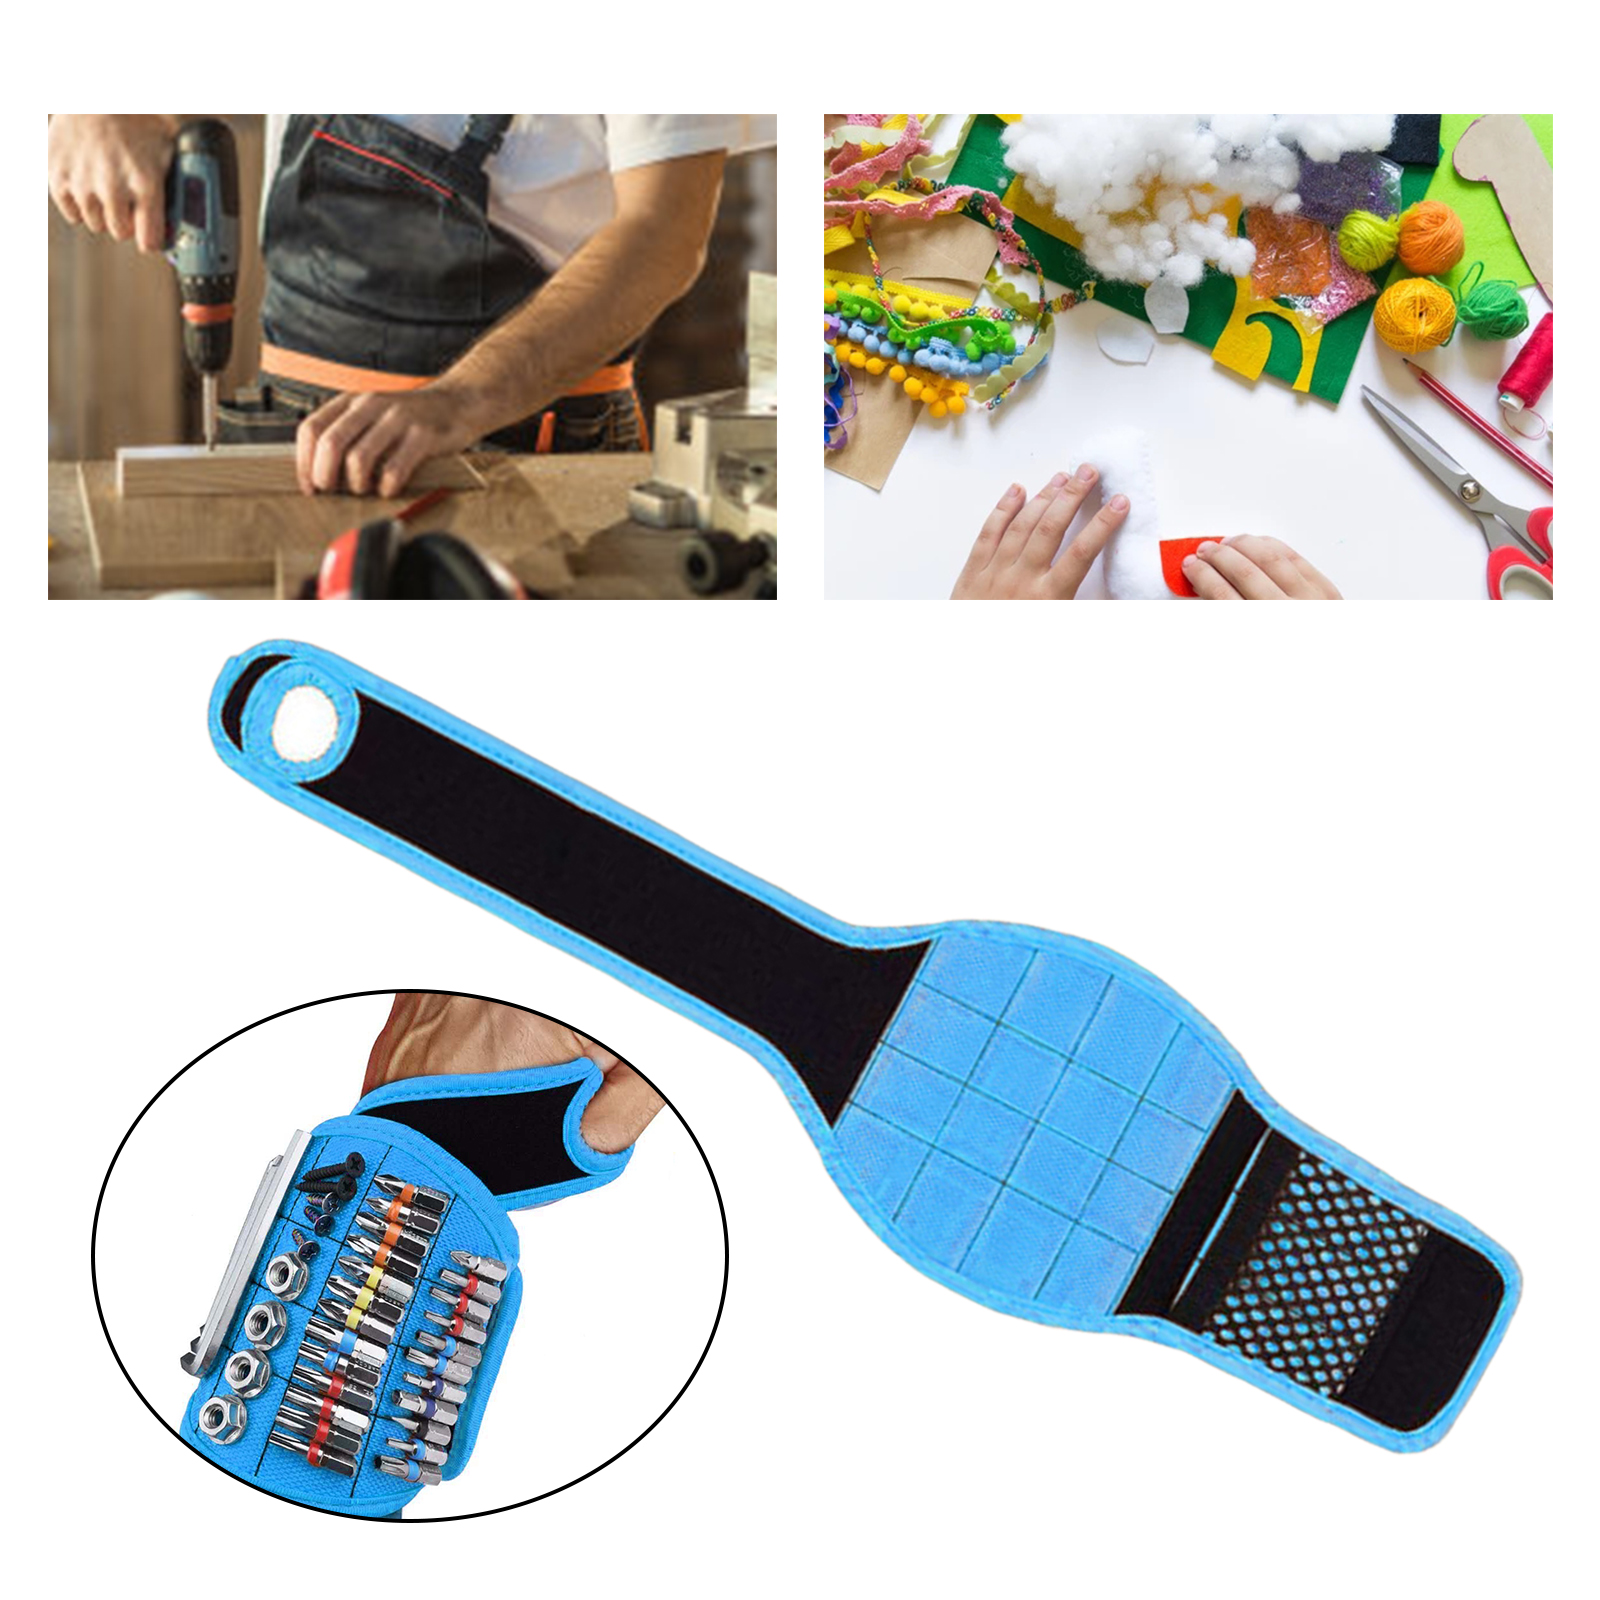 Magnetic Wristband Tool Belt for Holder Holding Screws Cool Gifts Gadgets Blue